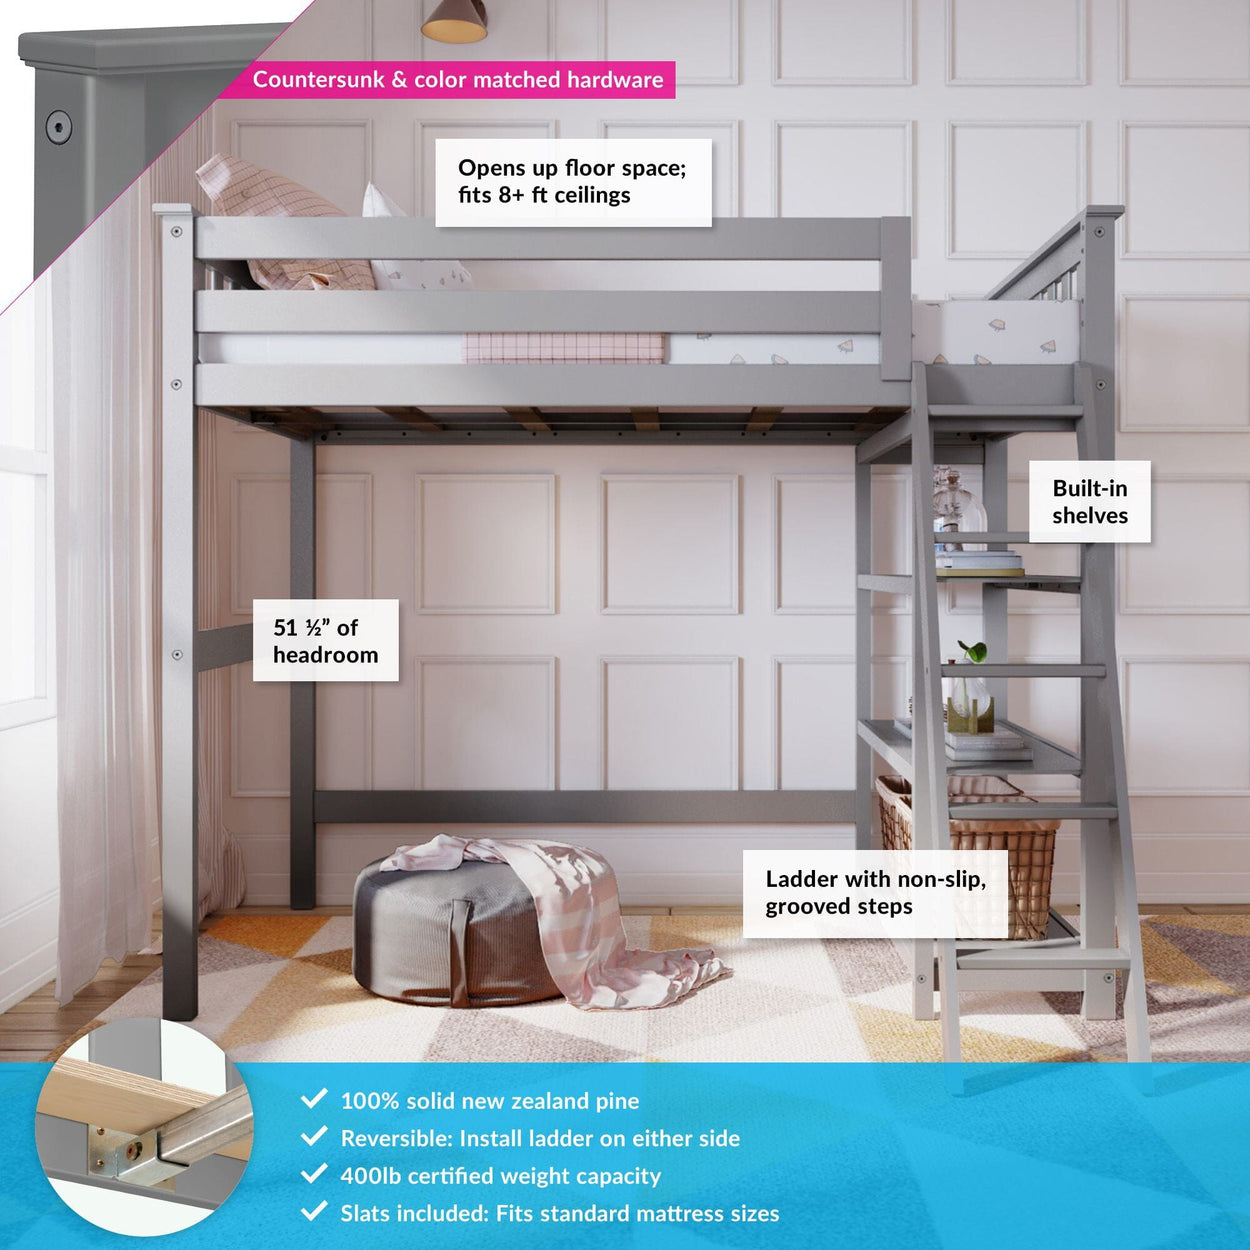 180218-121 : Loft Beds Twin-Size High Loft Bed with Bookcase, Grey